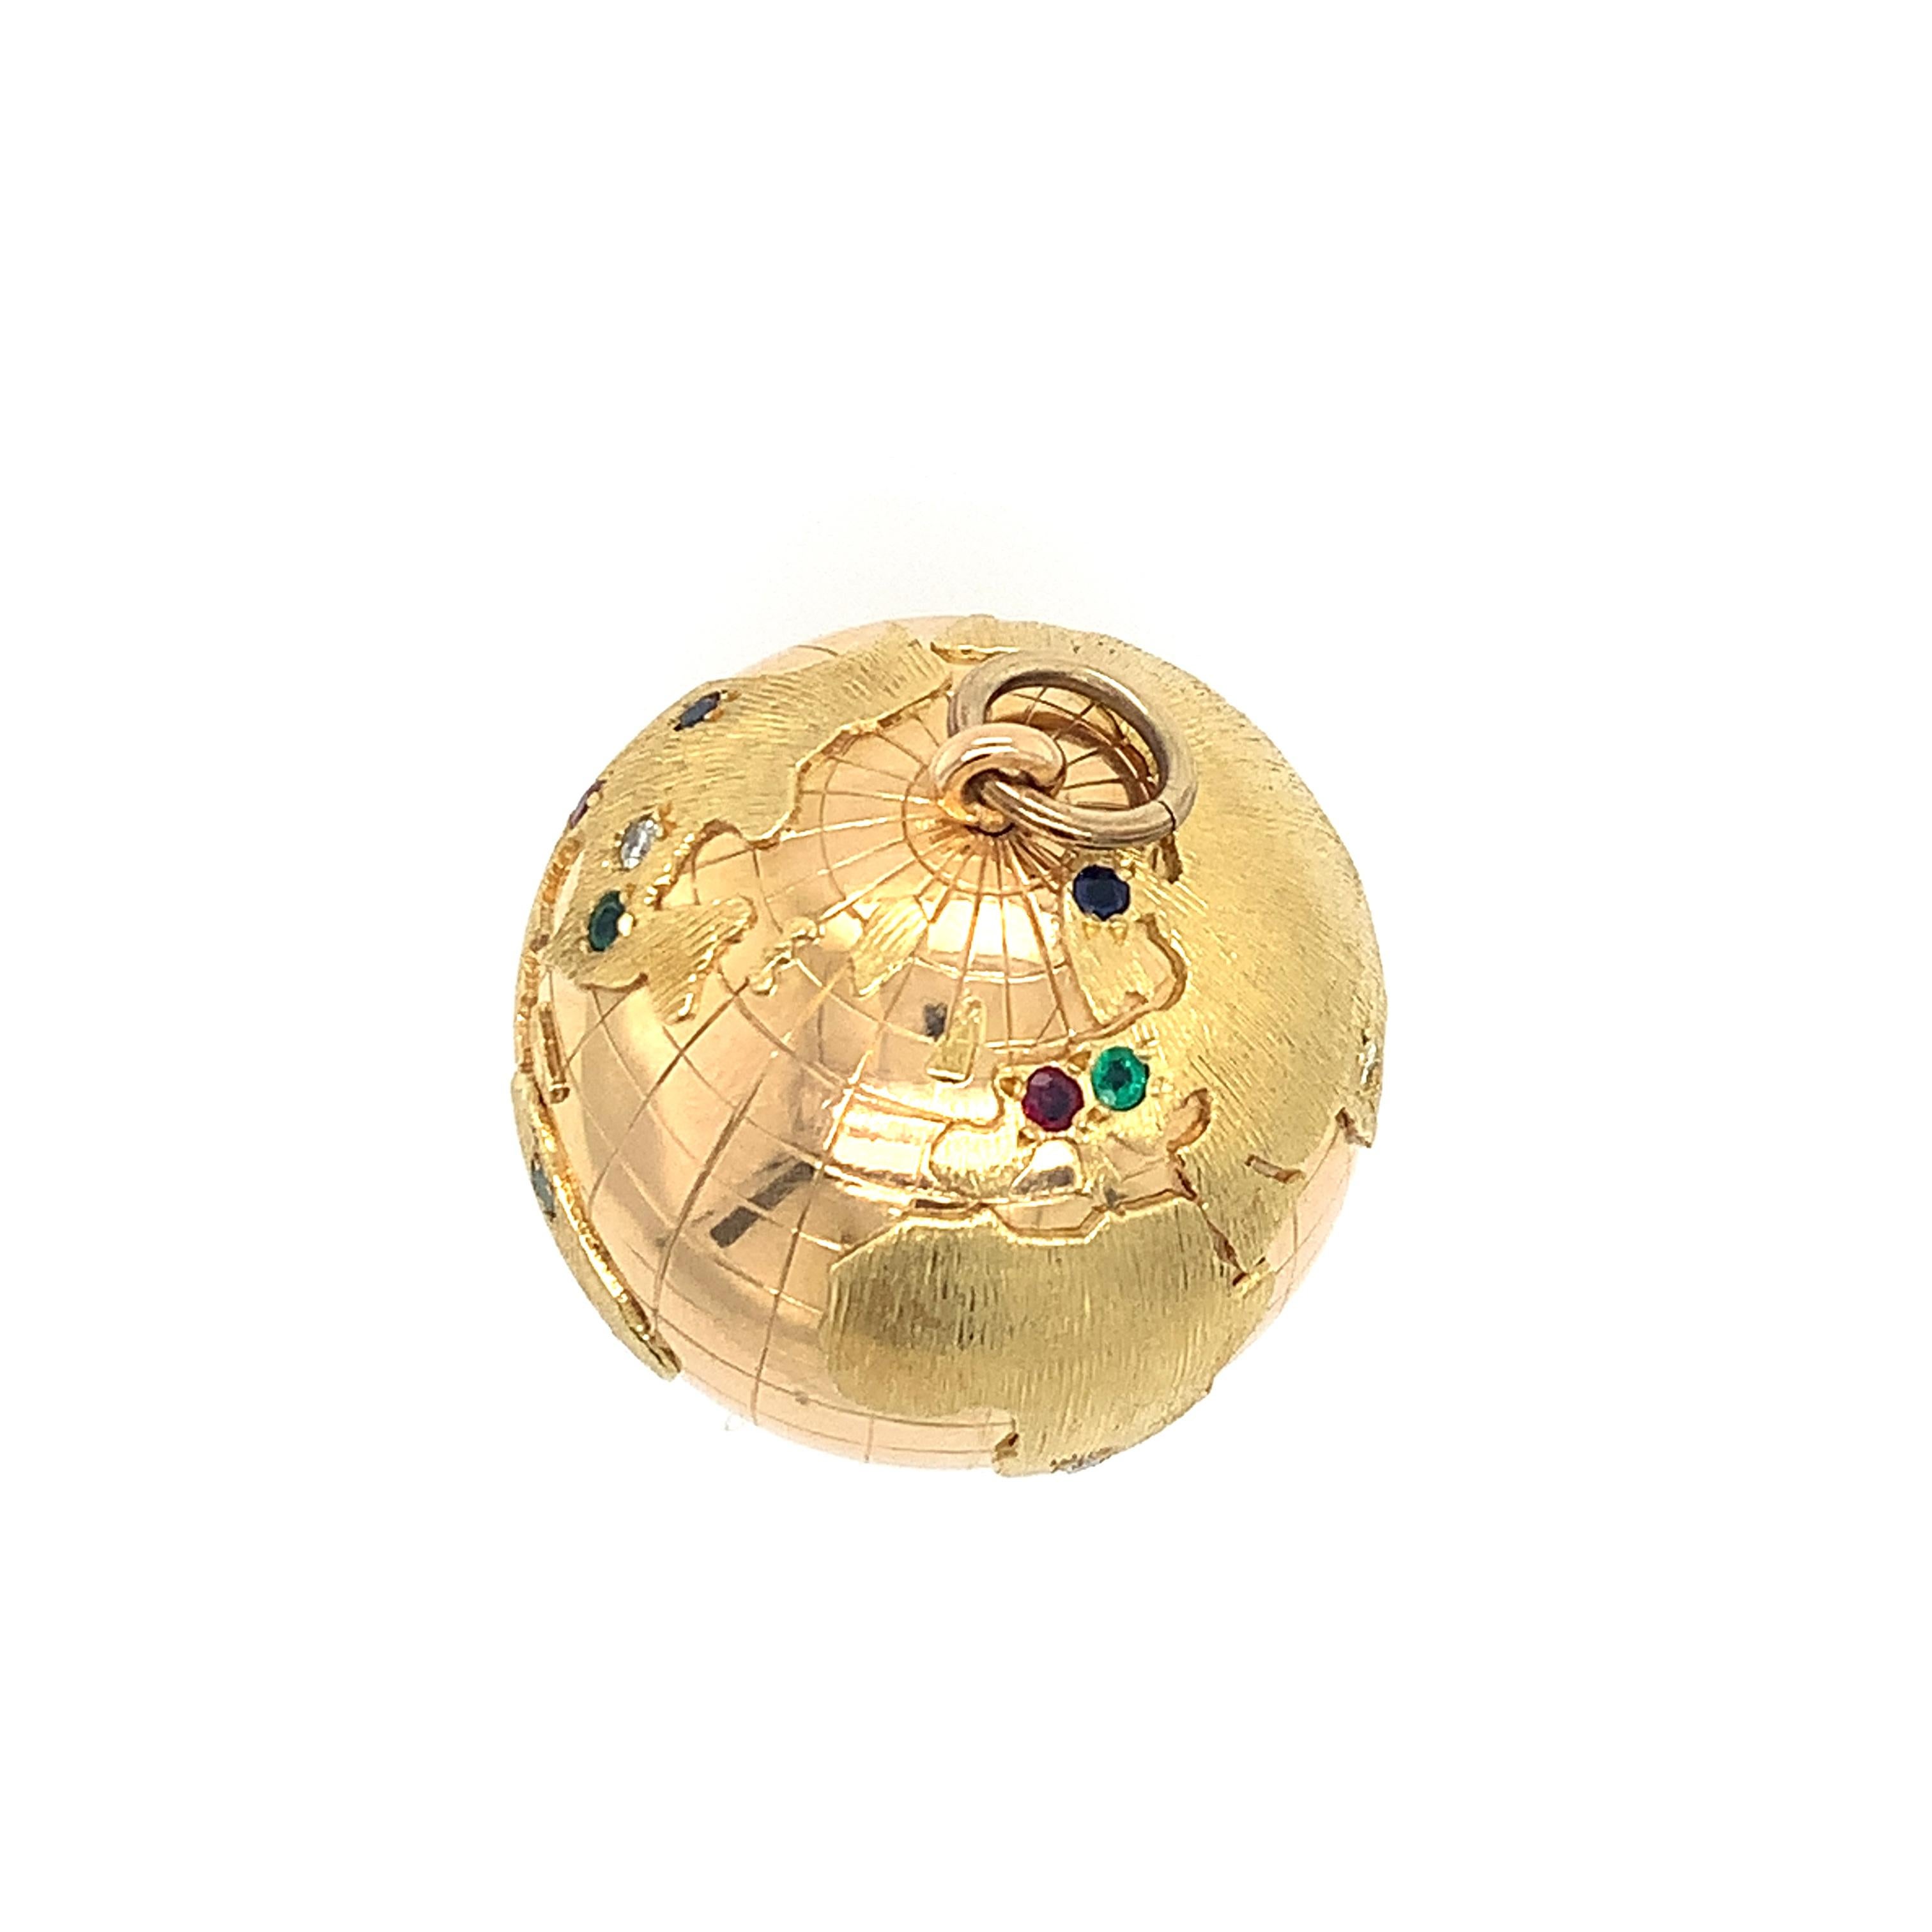 Large three-dimensional vintage 18K yellow gold dual finished globe charm set with sapphires, rubies, emeralds, and round brilliant cut diamonds. Featuring latitude longitude pattern with well-defined textured continents, this simple charm pendant